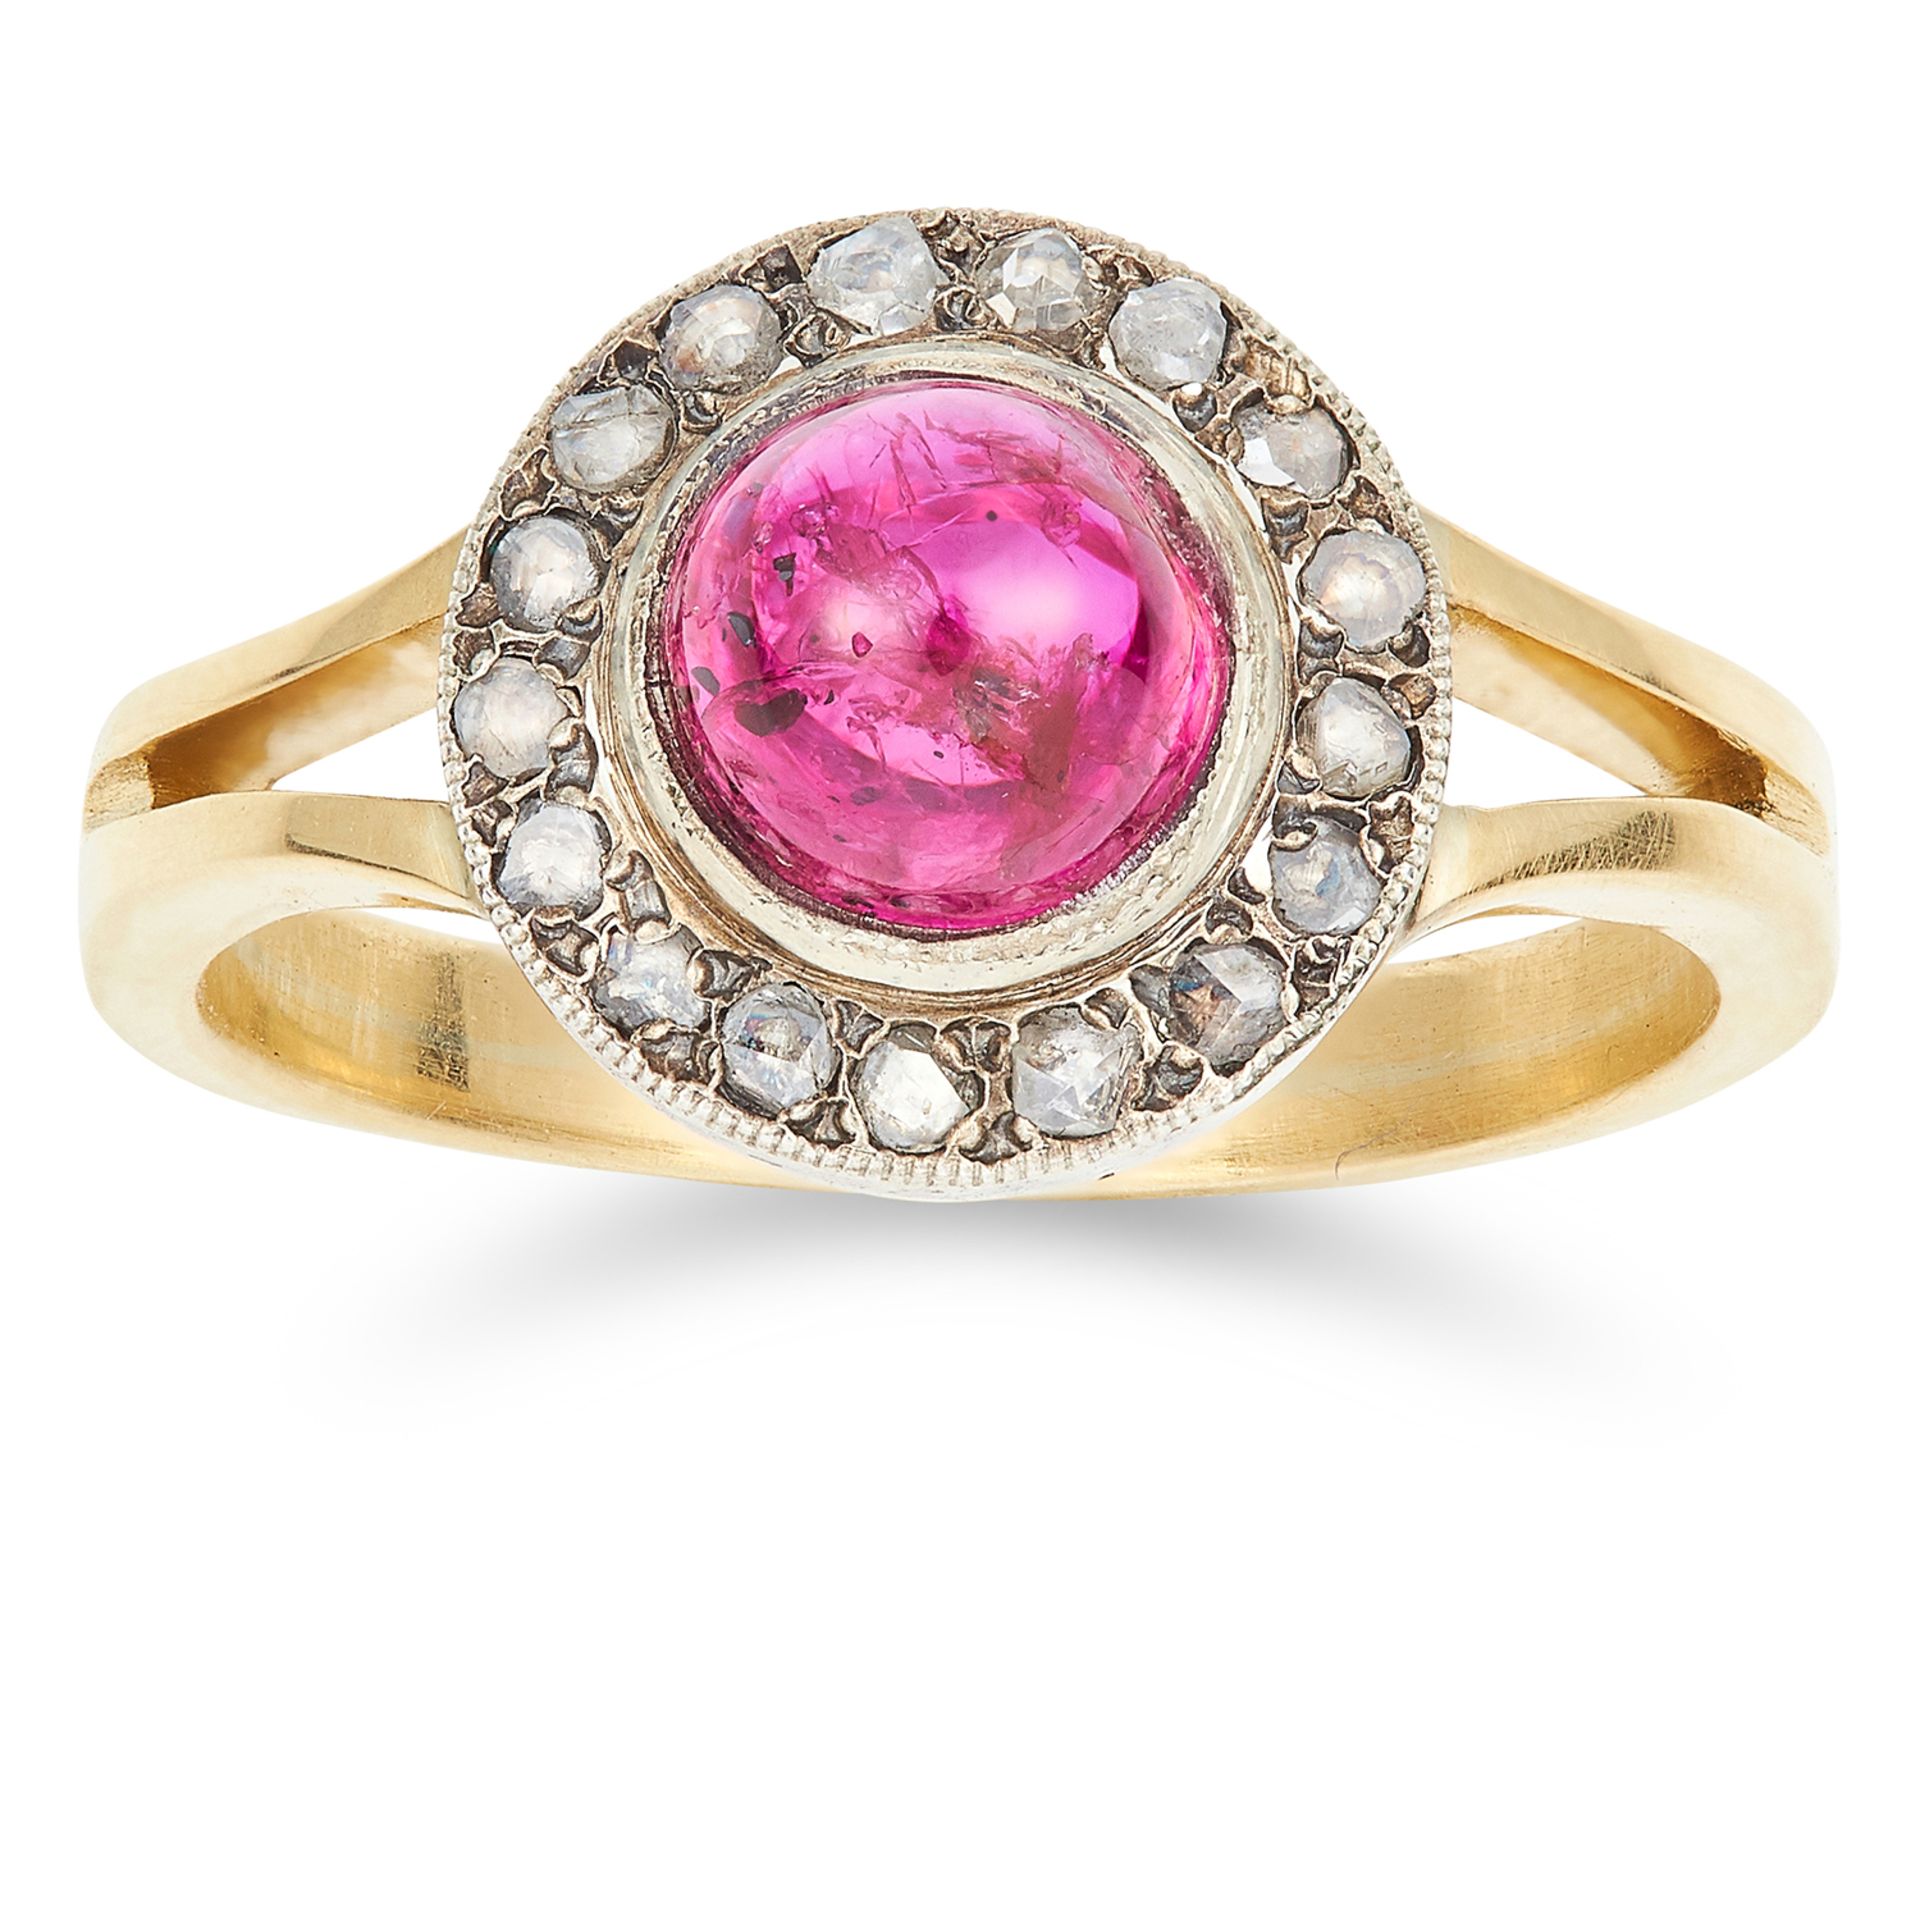 UNHEATED 1.92 CARAT RUBY AND DIAMOND RING set with a circular cabochon ruby and rose cut diamonds,